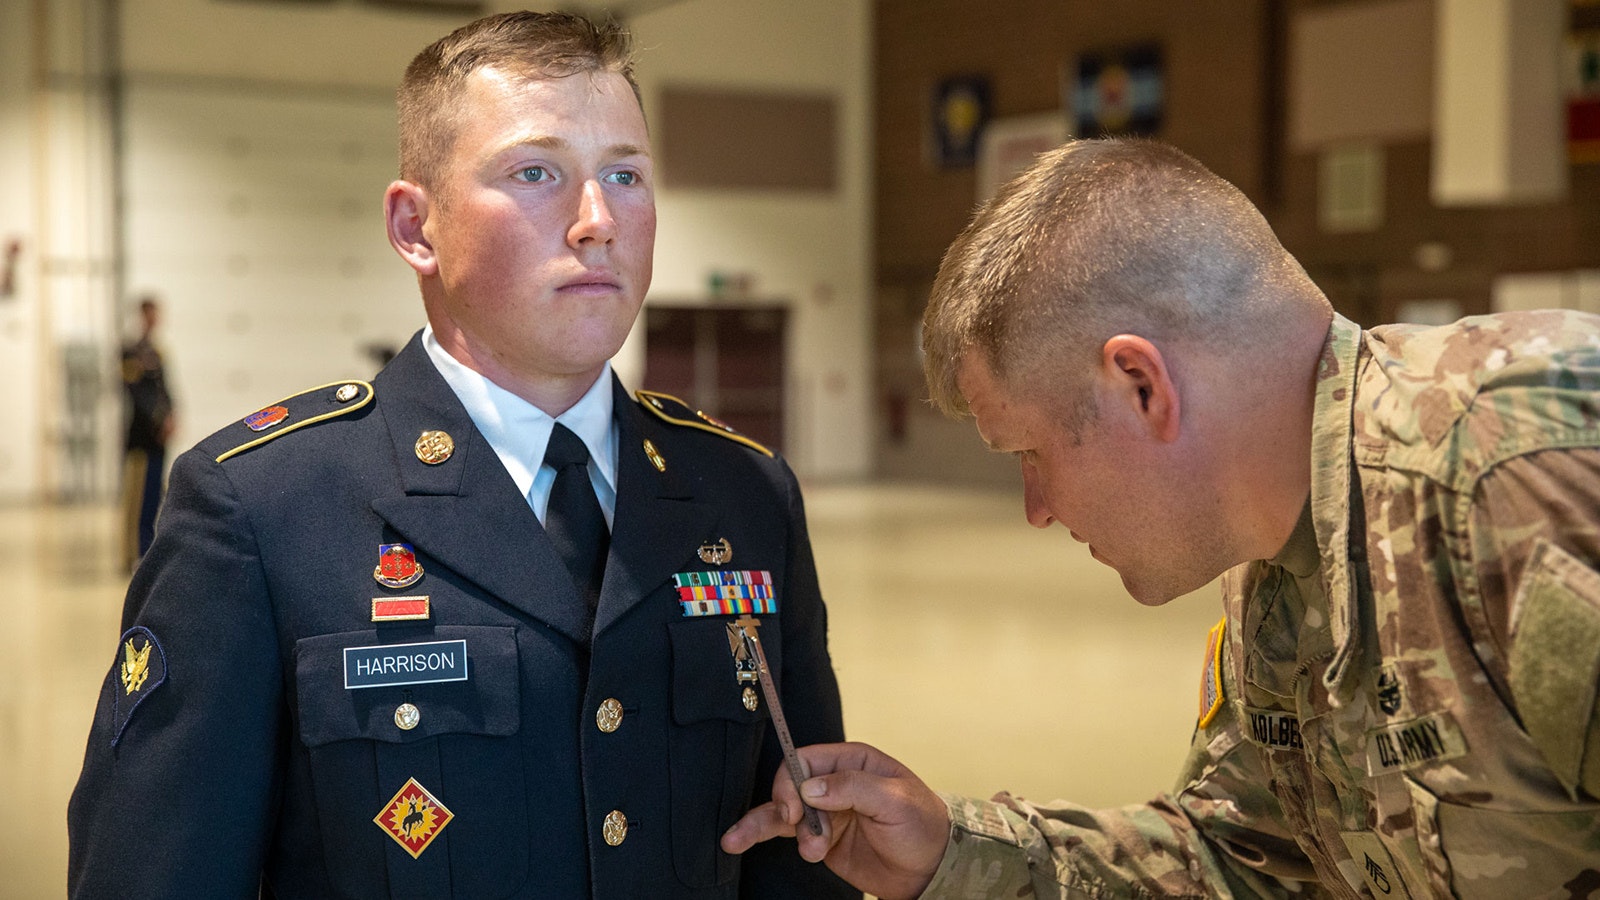 U.S. Army Spc. Luke Harrison, a field artillery radar operator assigned to the Wyoming Army National Guard, representing Region VI, stands at the position of attention while getting his uniform inspected at the 2023 National Guard Best Warrior Competition, Alaska, July 9, 2023.